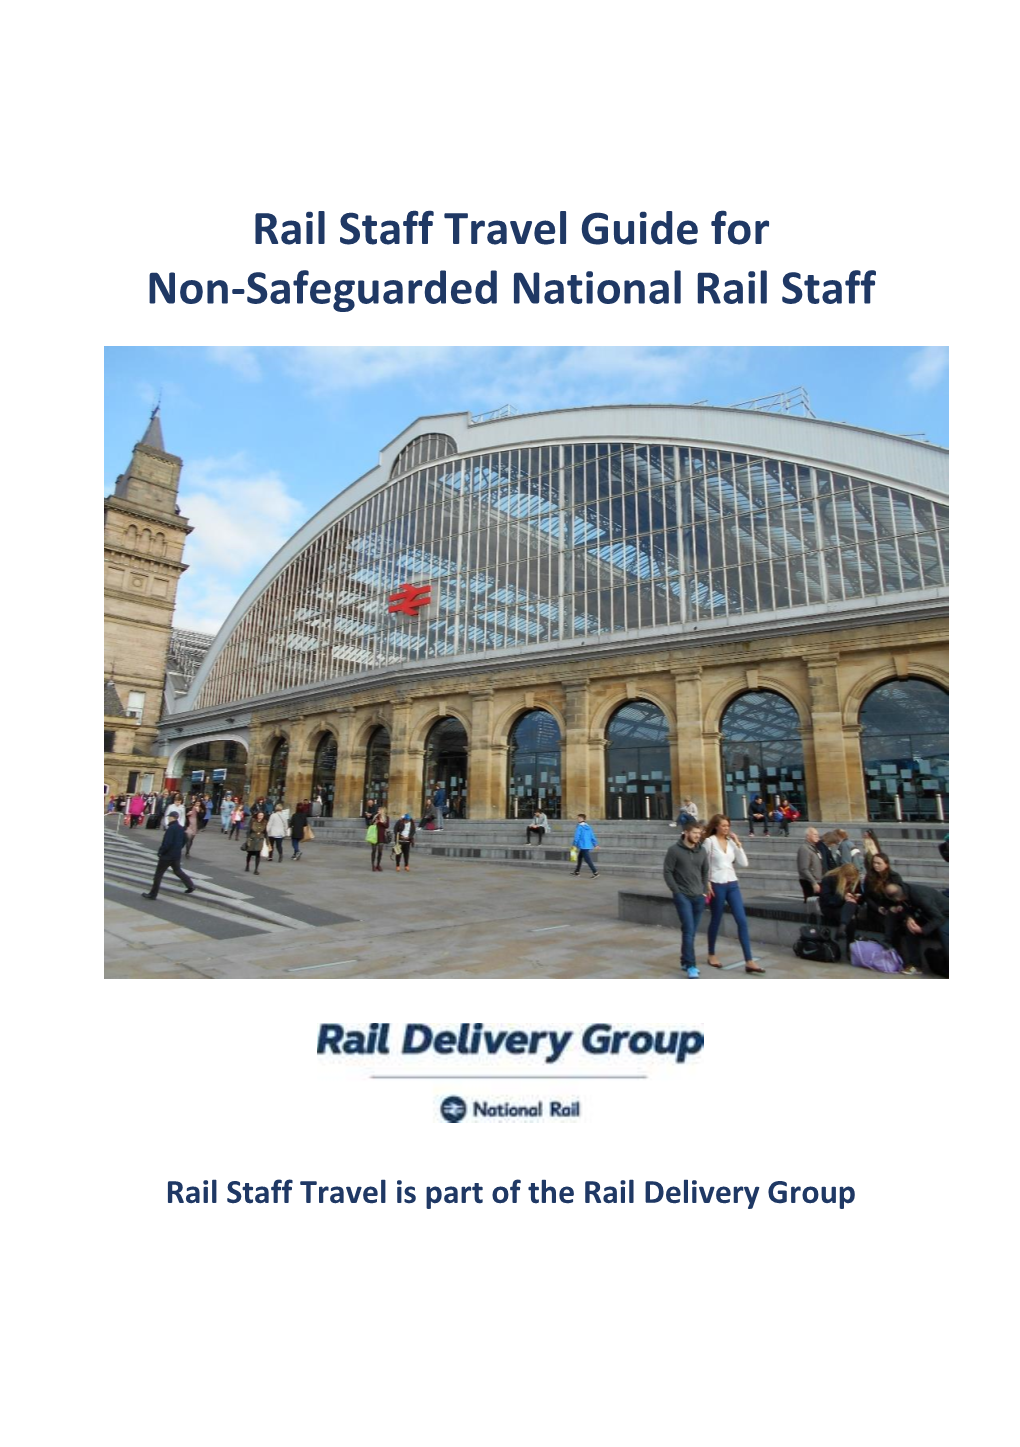 Rail Staff Travel Guide for Non-Safeguarded Staff